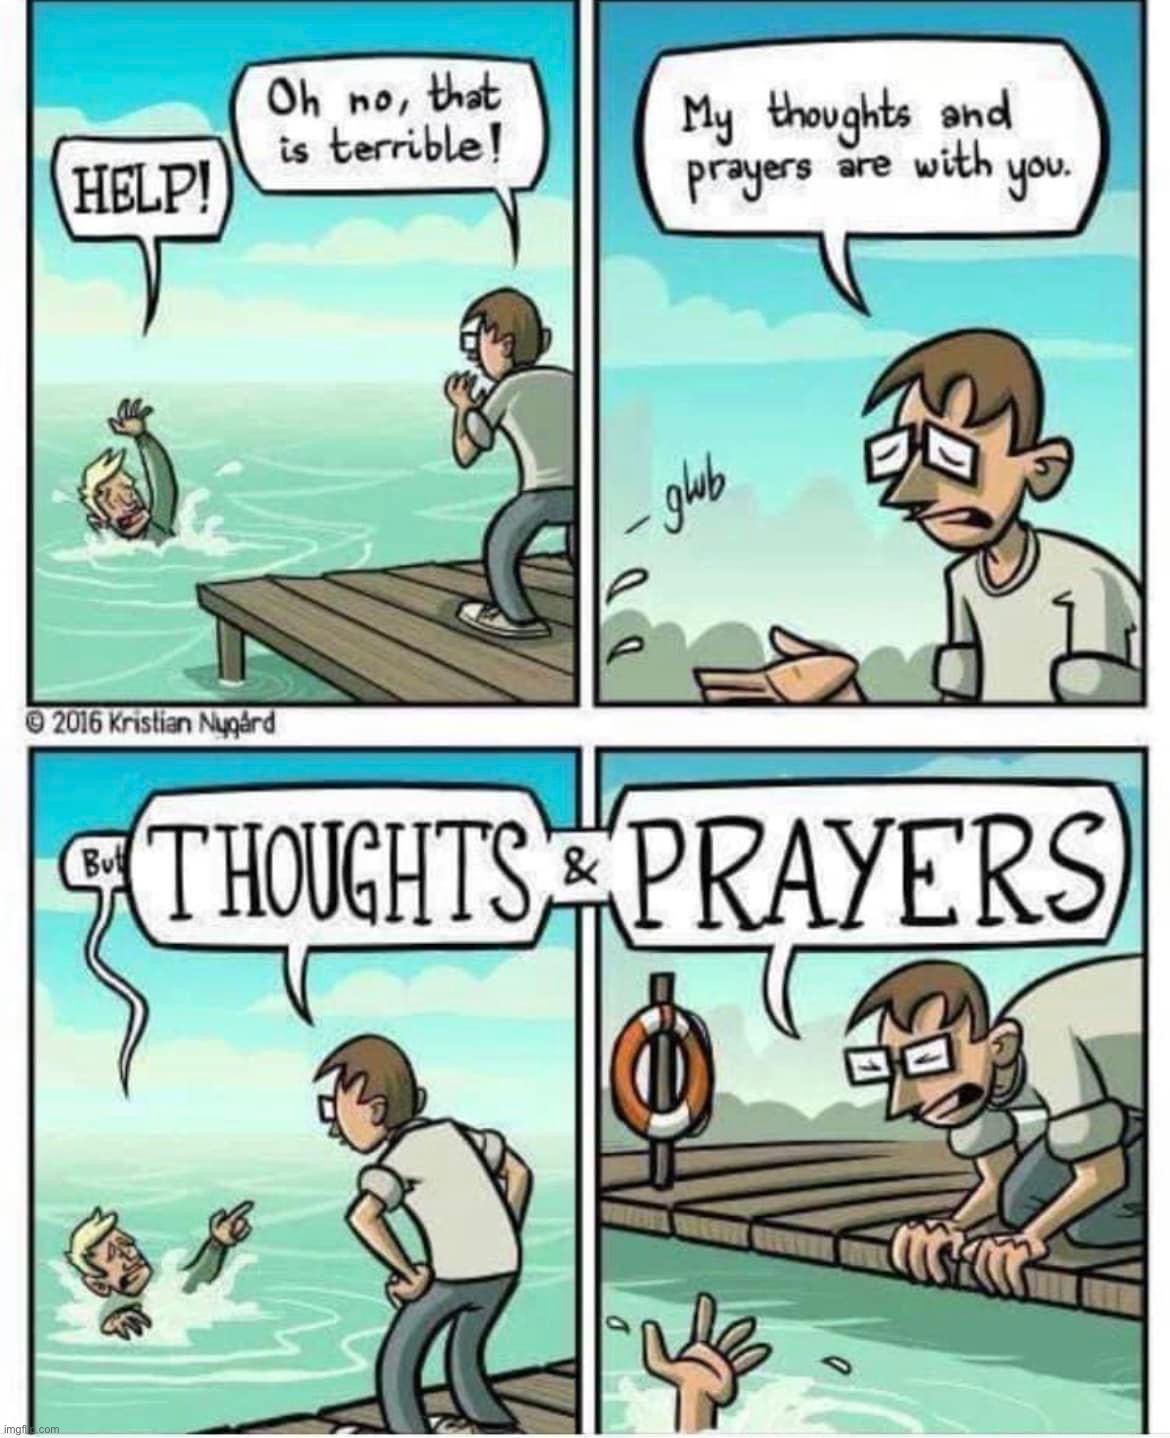 Thoughts and prayers | image tagged in thoughts and prayers,conservative logic,conservative hypocrisy,hypocrisy,guns,comics/cartoons | made w/ Imgflip meme maker